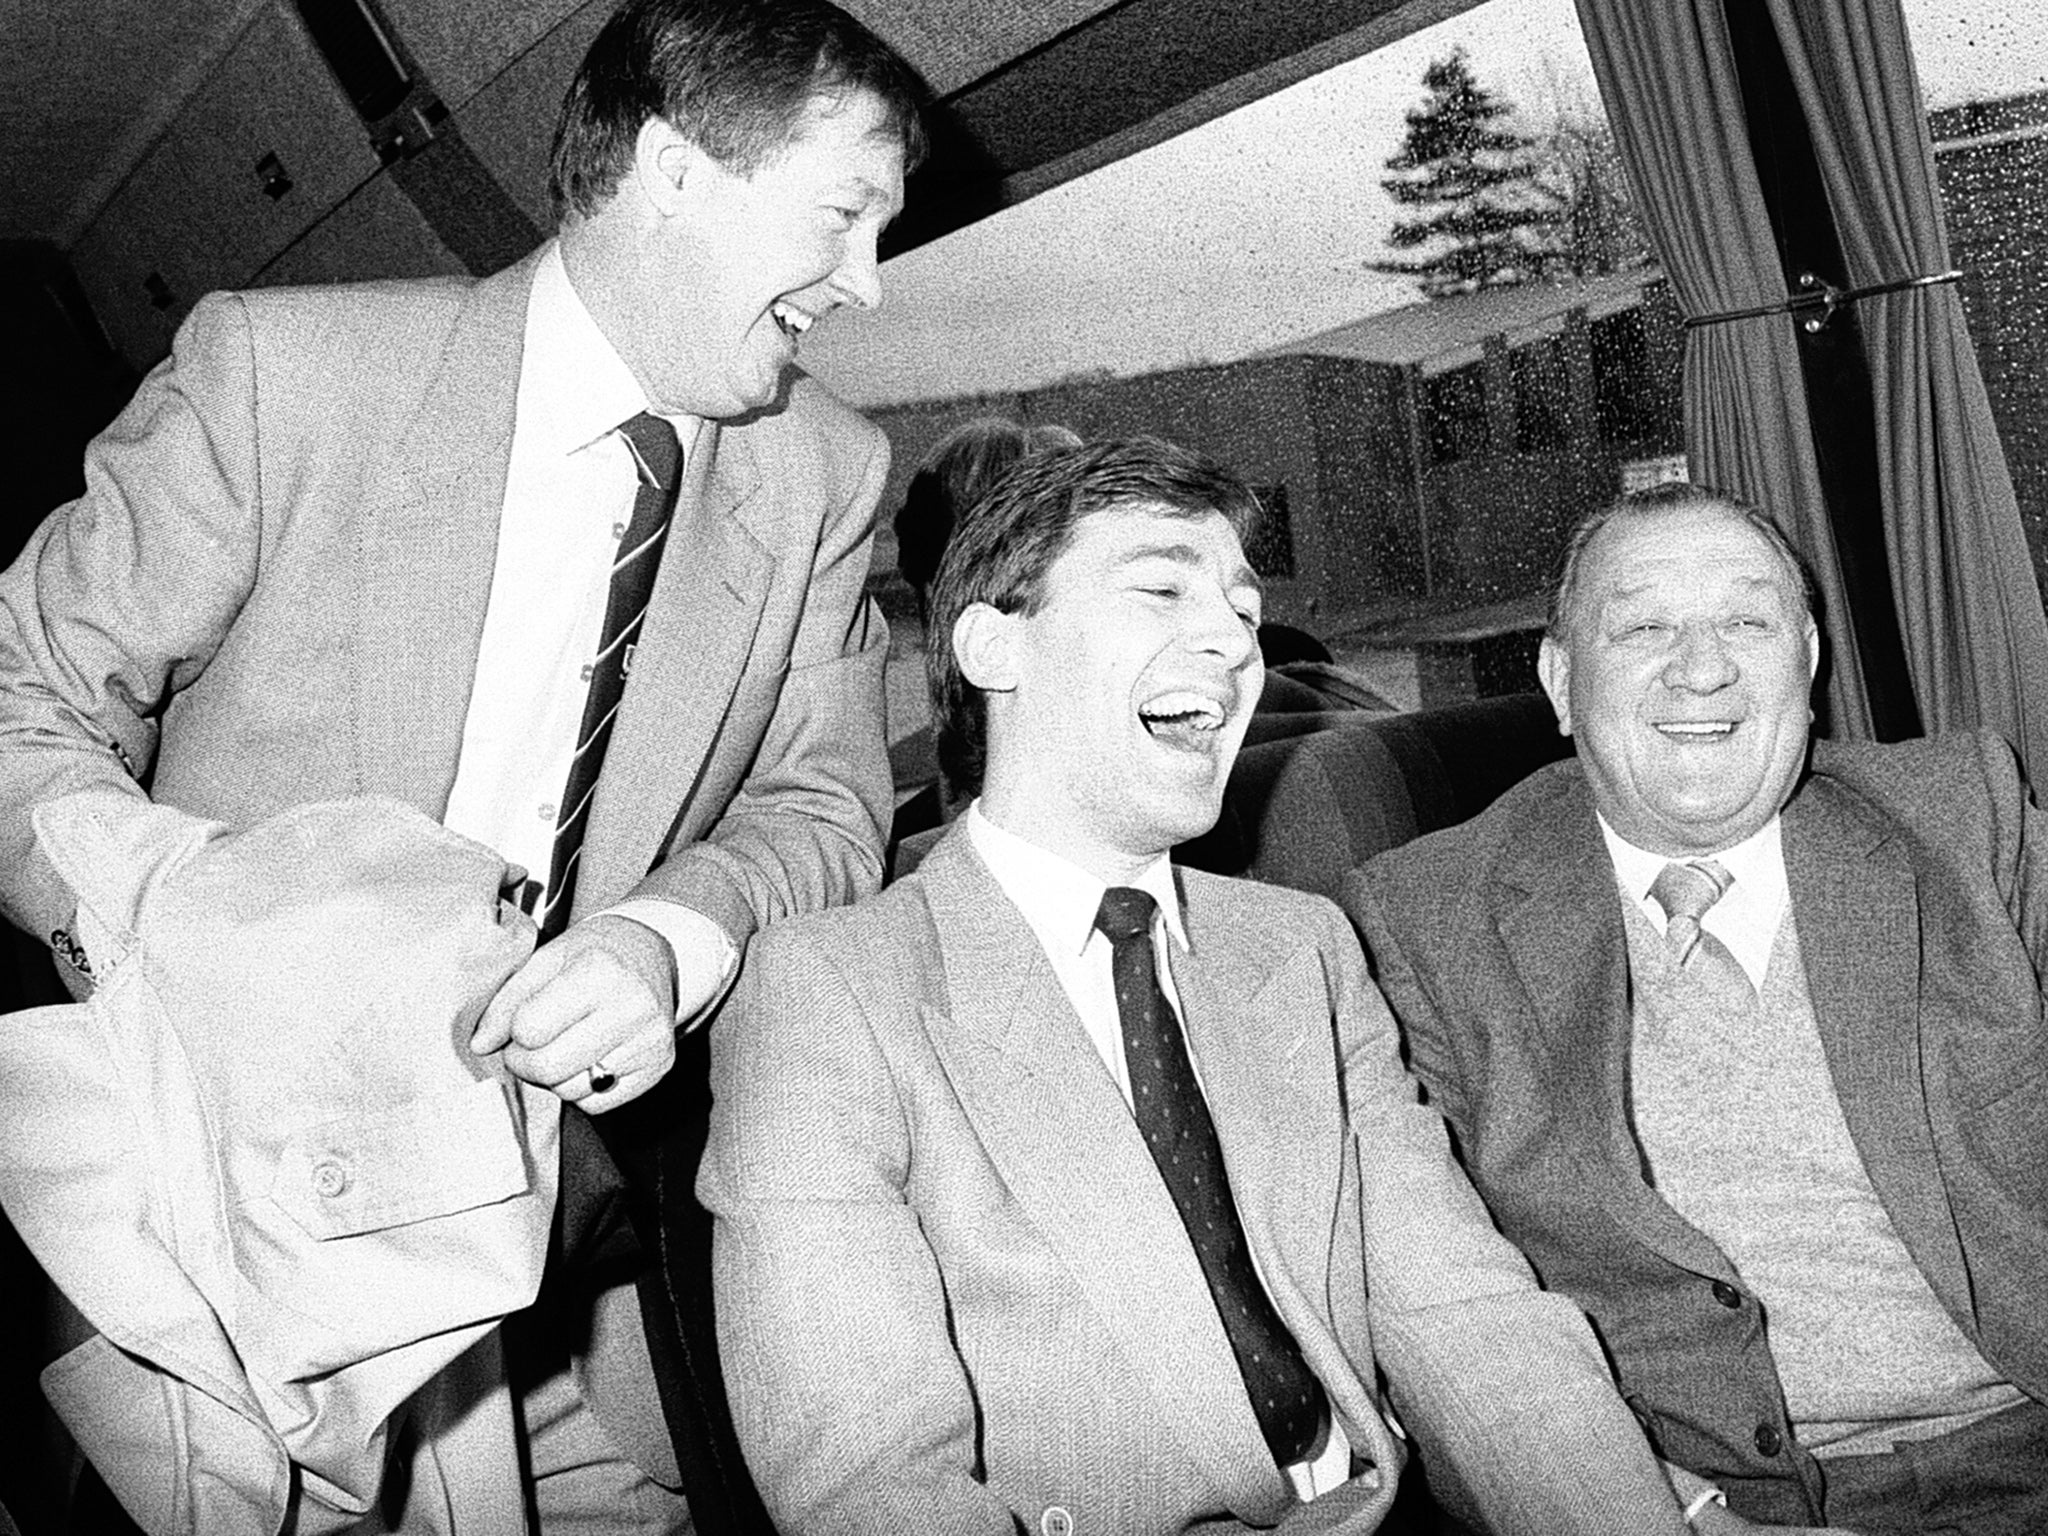 Bob Paisley (right), the former Liverpool manager, shares a joke with Bryan Robson (centre) and Alex Ferguson (left) on the United team coach travelling to Anfield on Boxing Day 1986